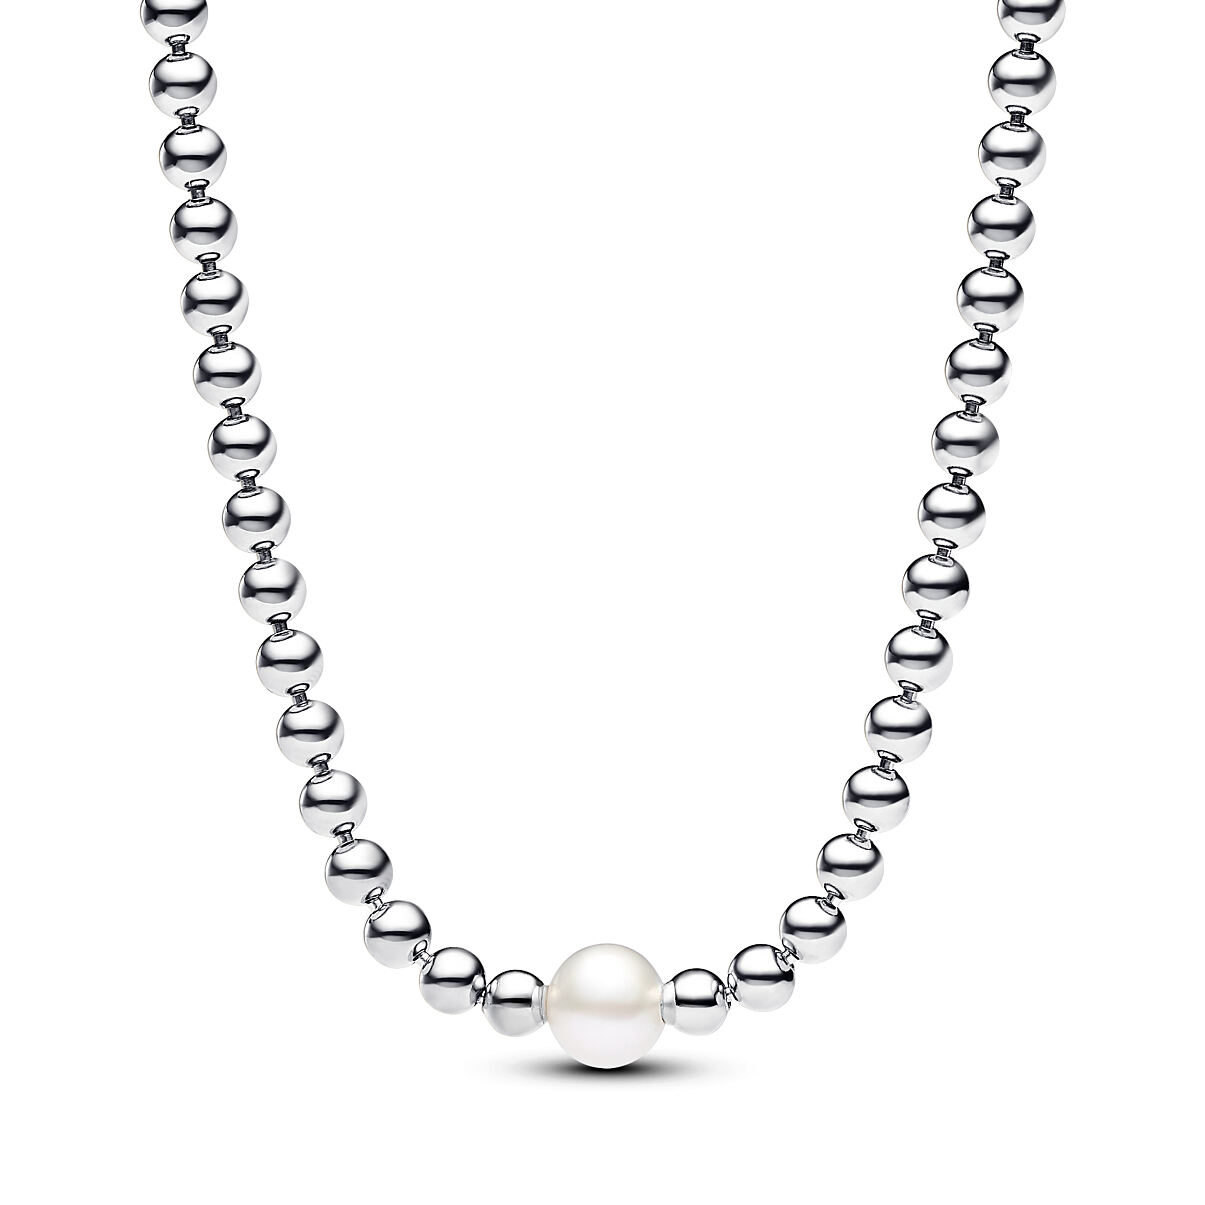 Pandora_Necklace_Sterling Silver_Freshwater Pearls_Cubic Zirconia_393176C01_149,00 Euro (2)